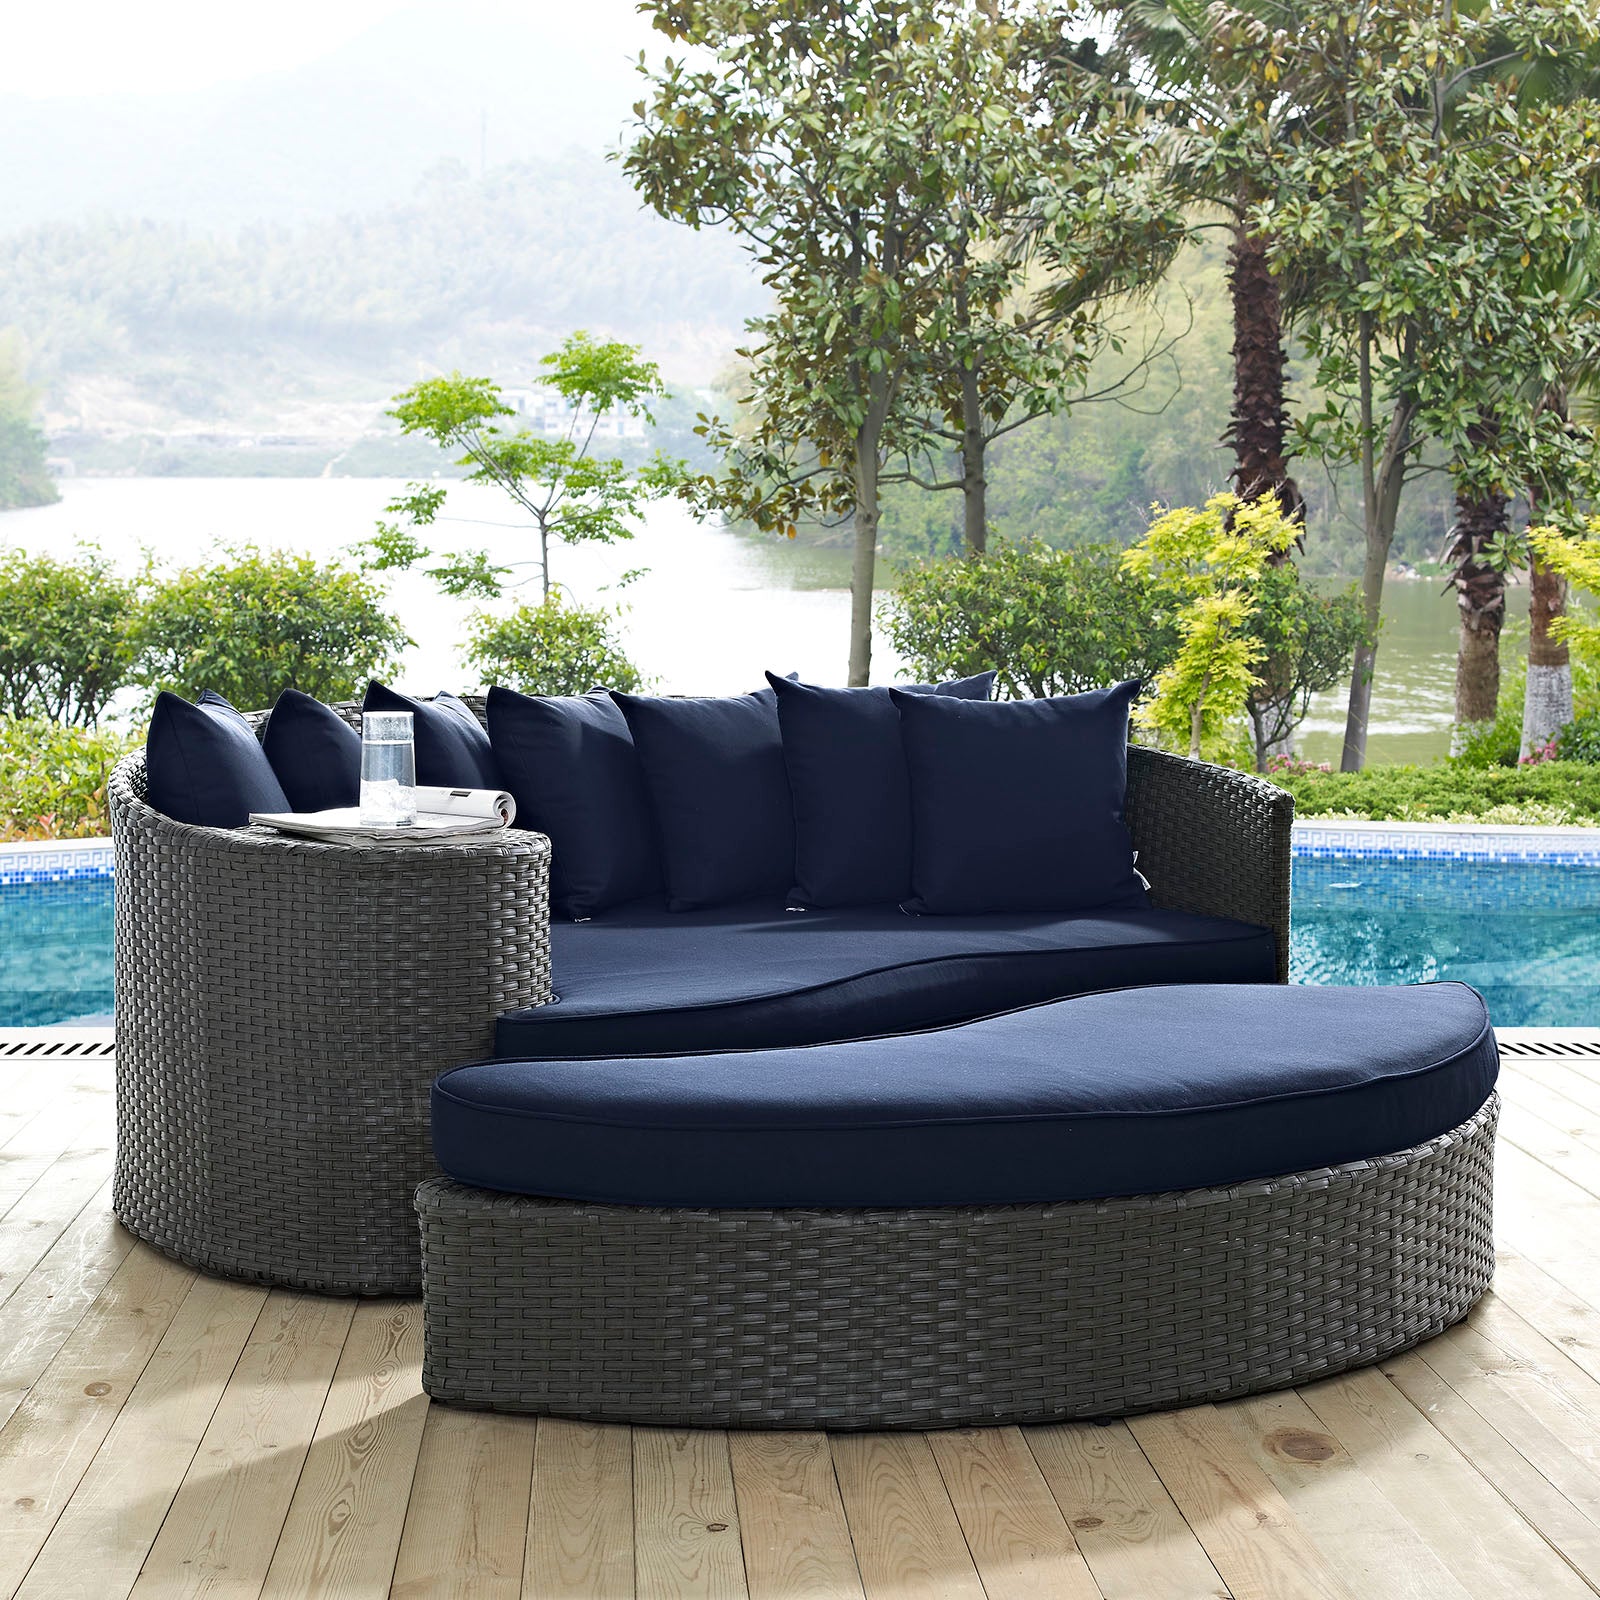 Modway Patio Daybeds - Sojourn Outdoor Patio Daybed Canvas Navy